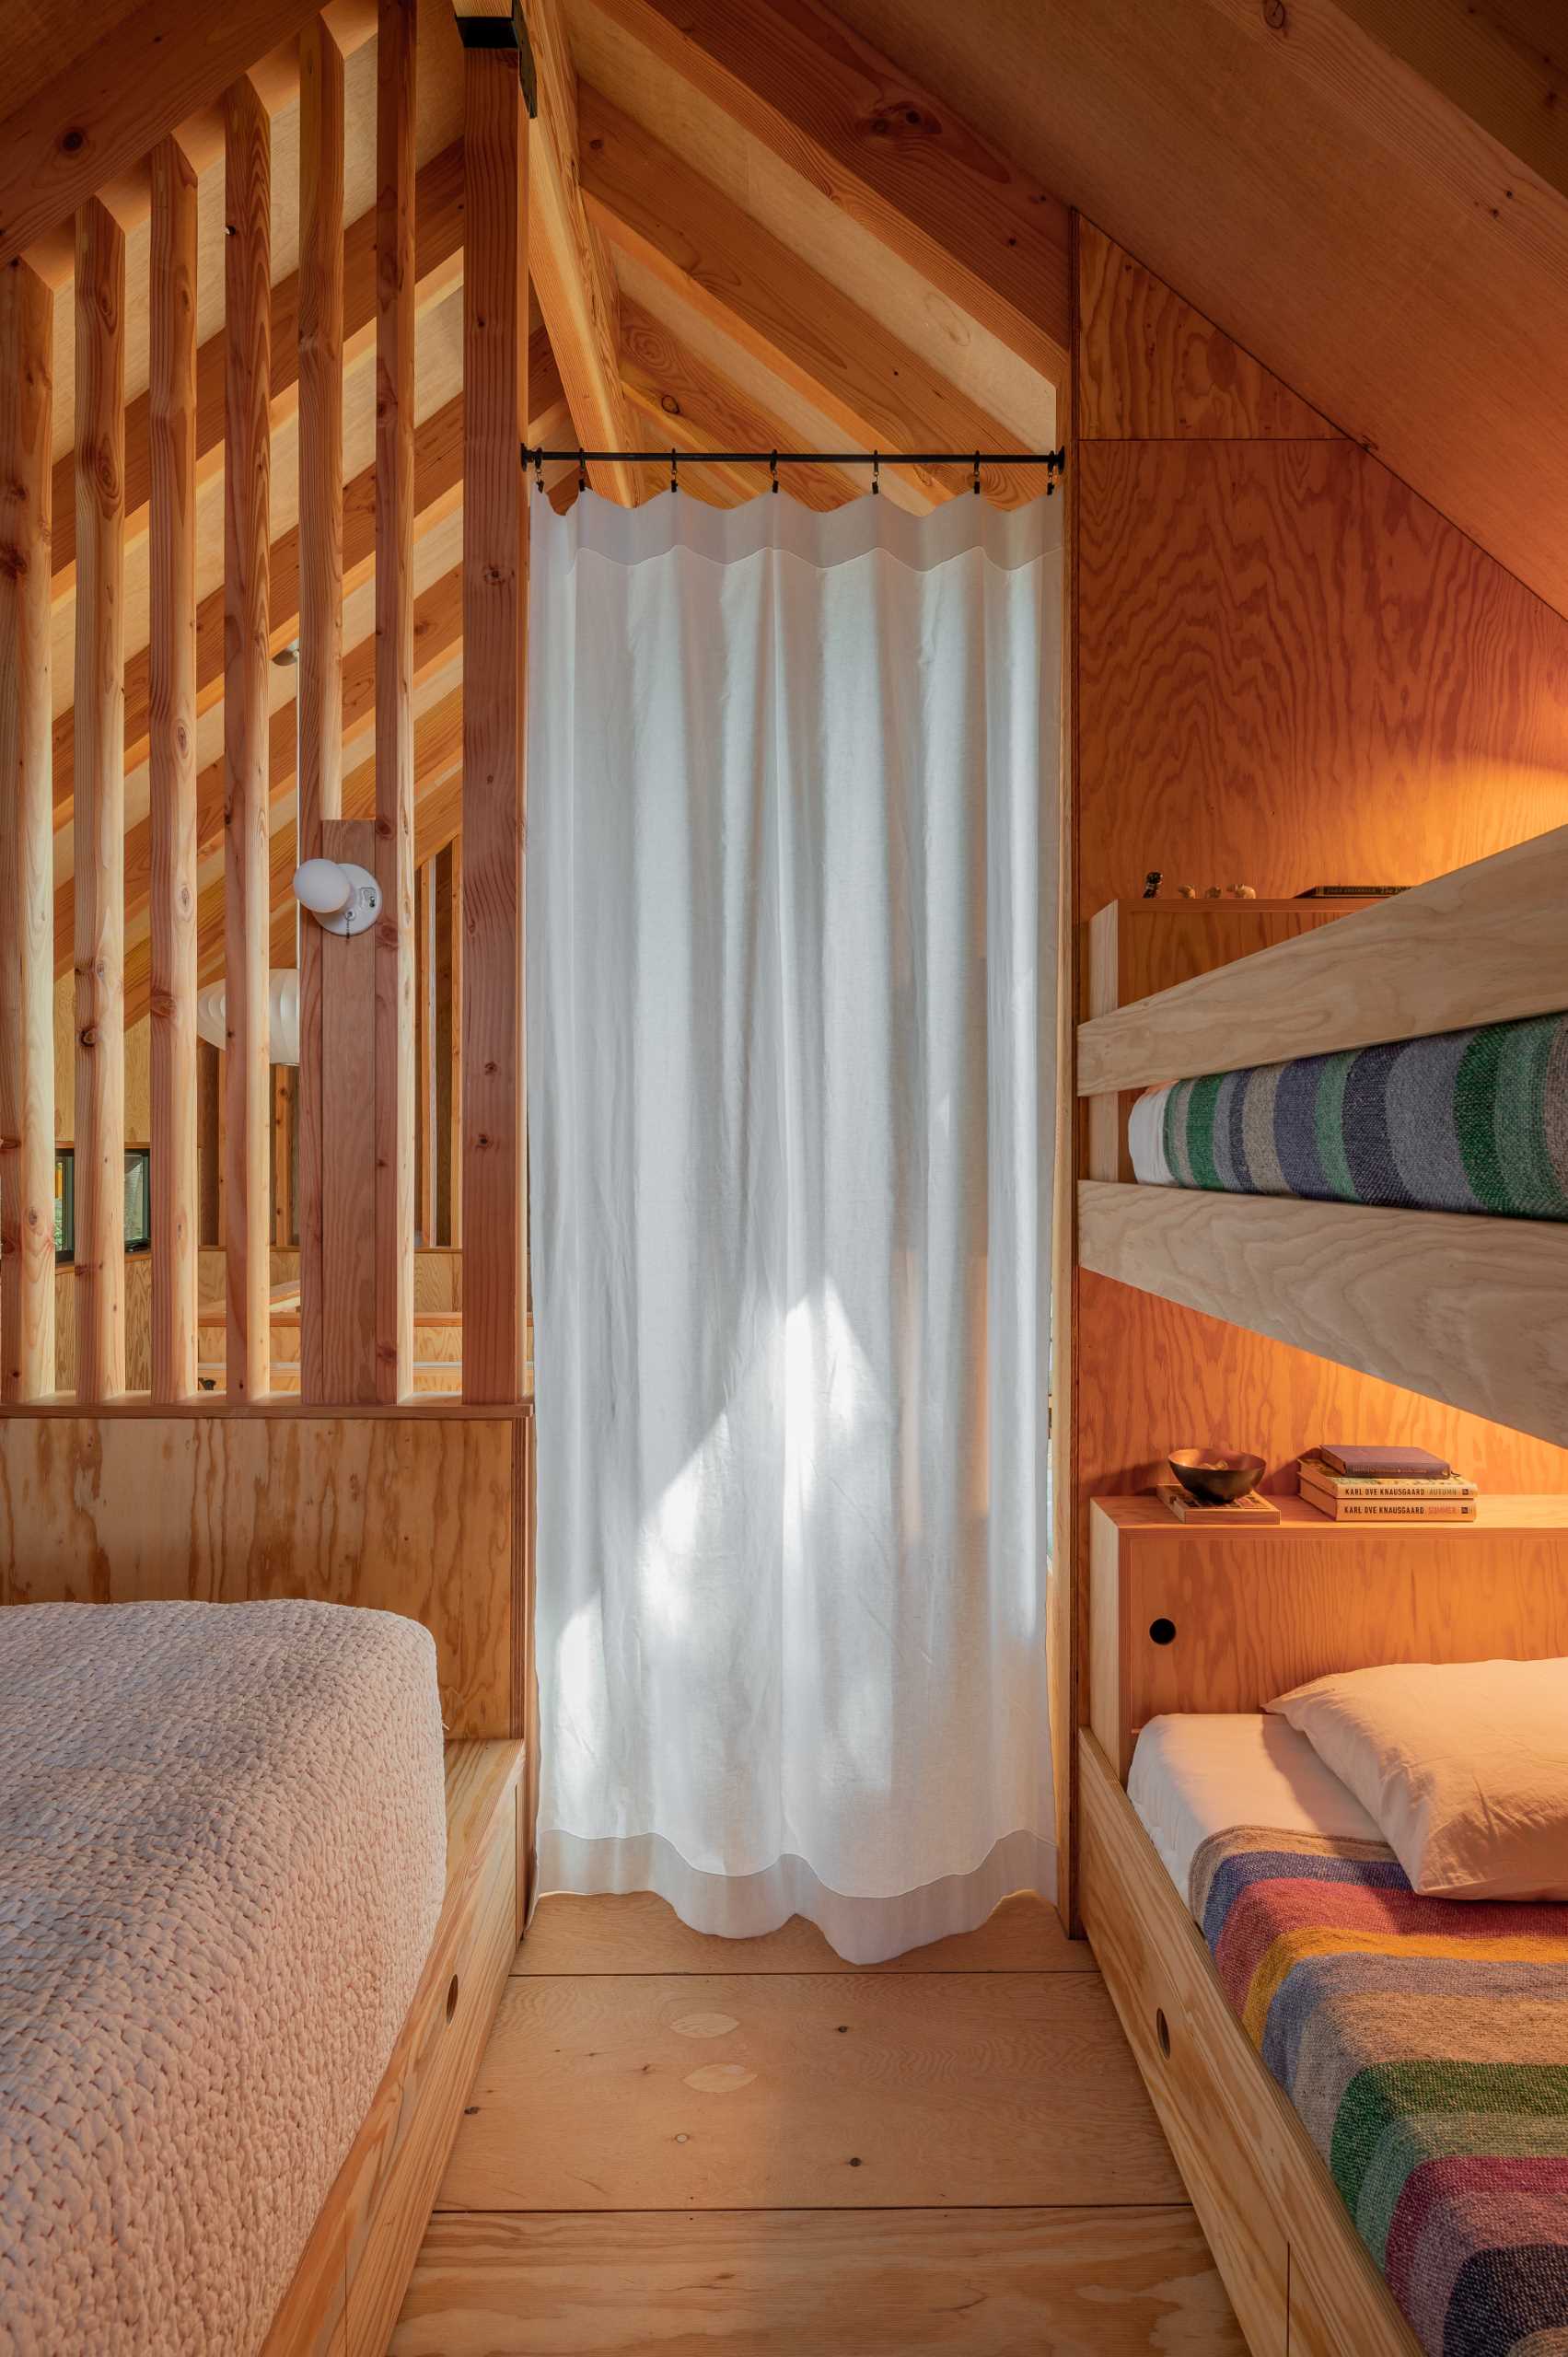 The bedrooms in this cabin are located on either side of the lounge area, with both bunk beds and regular beds. Curtains can be drawn to provide privacy when needed.